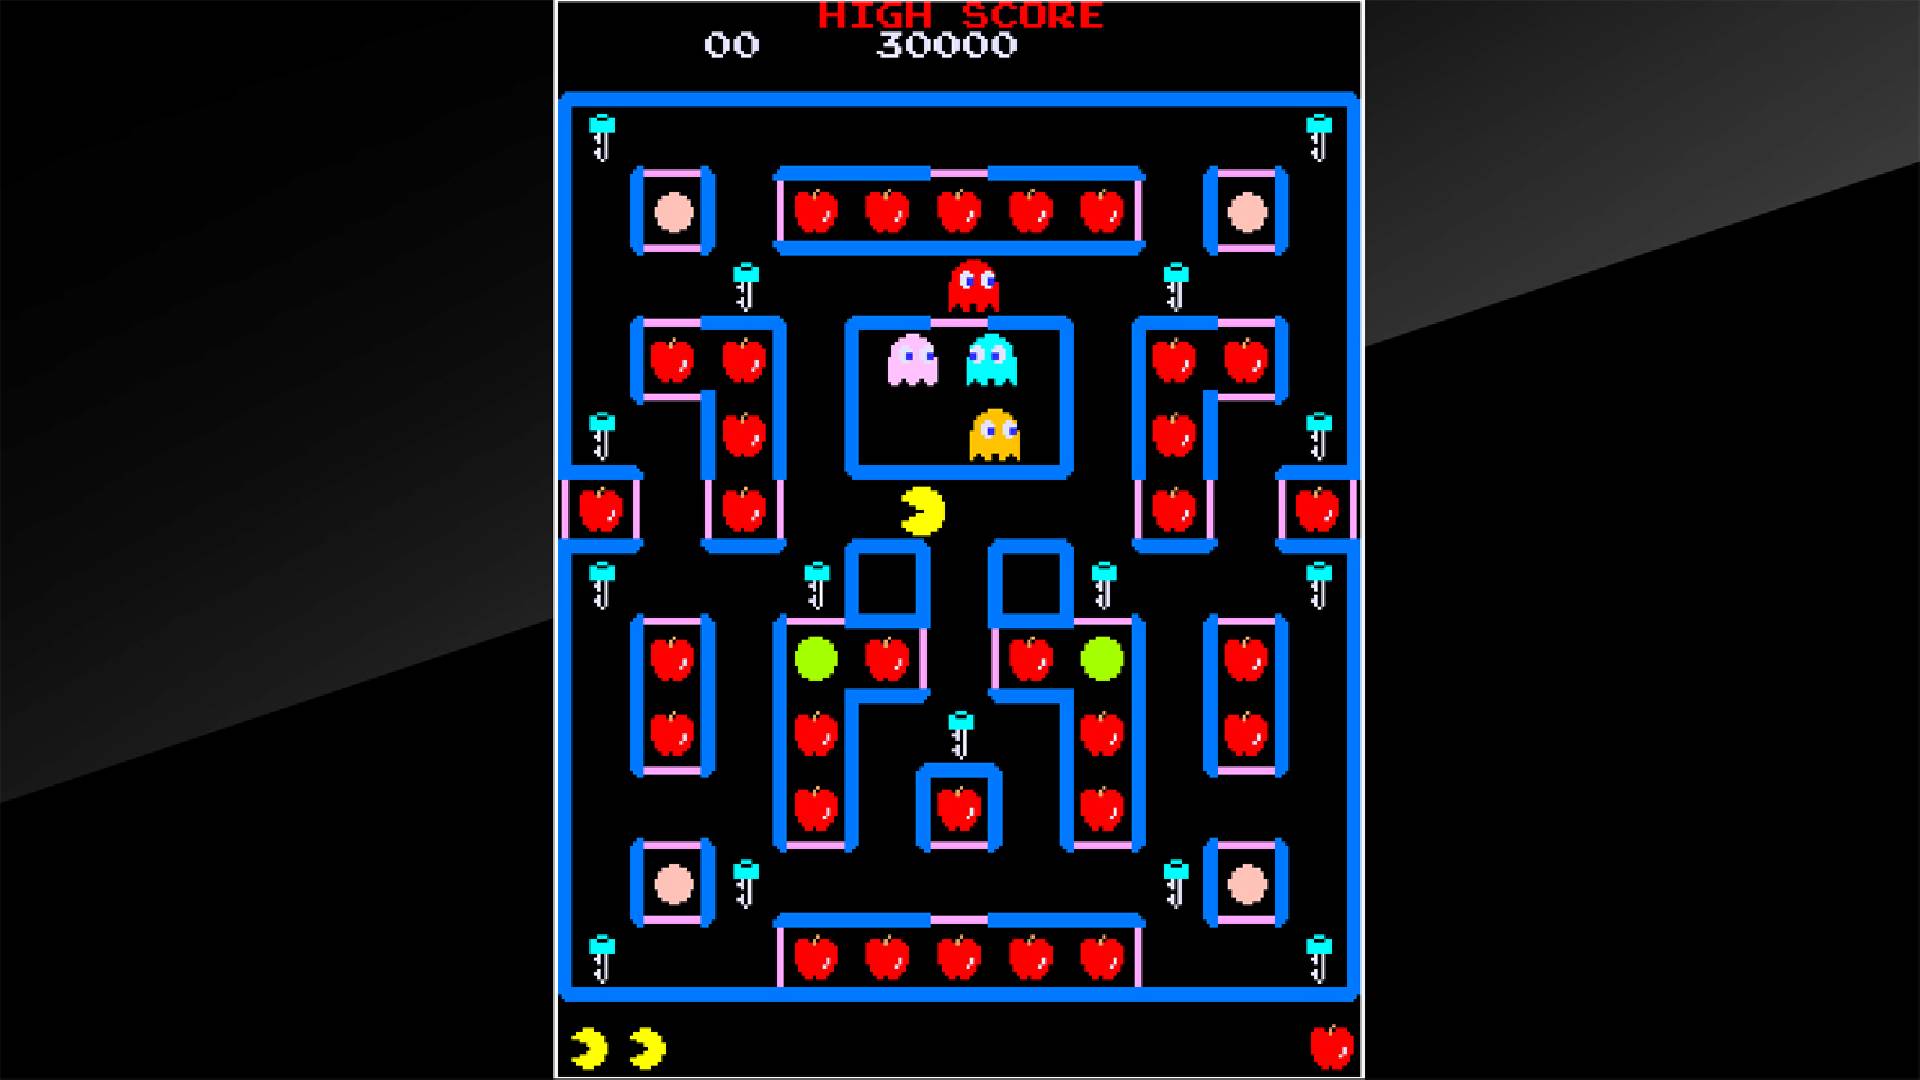 Best Pac-Man games: A level from the game Super Pac-Man is visible